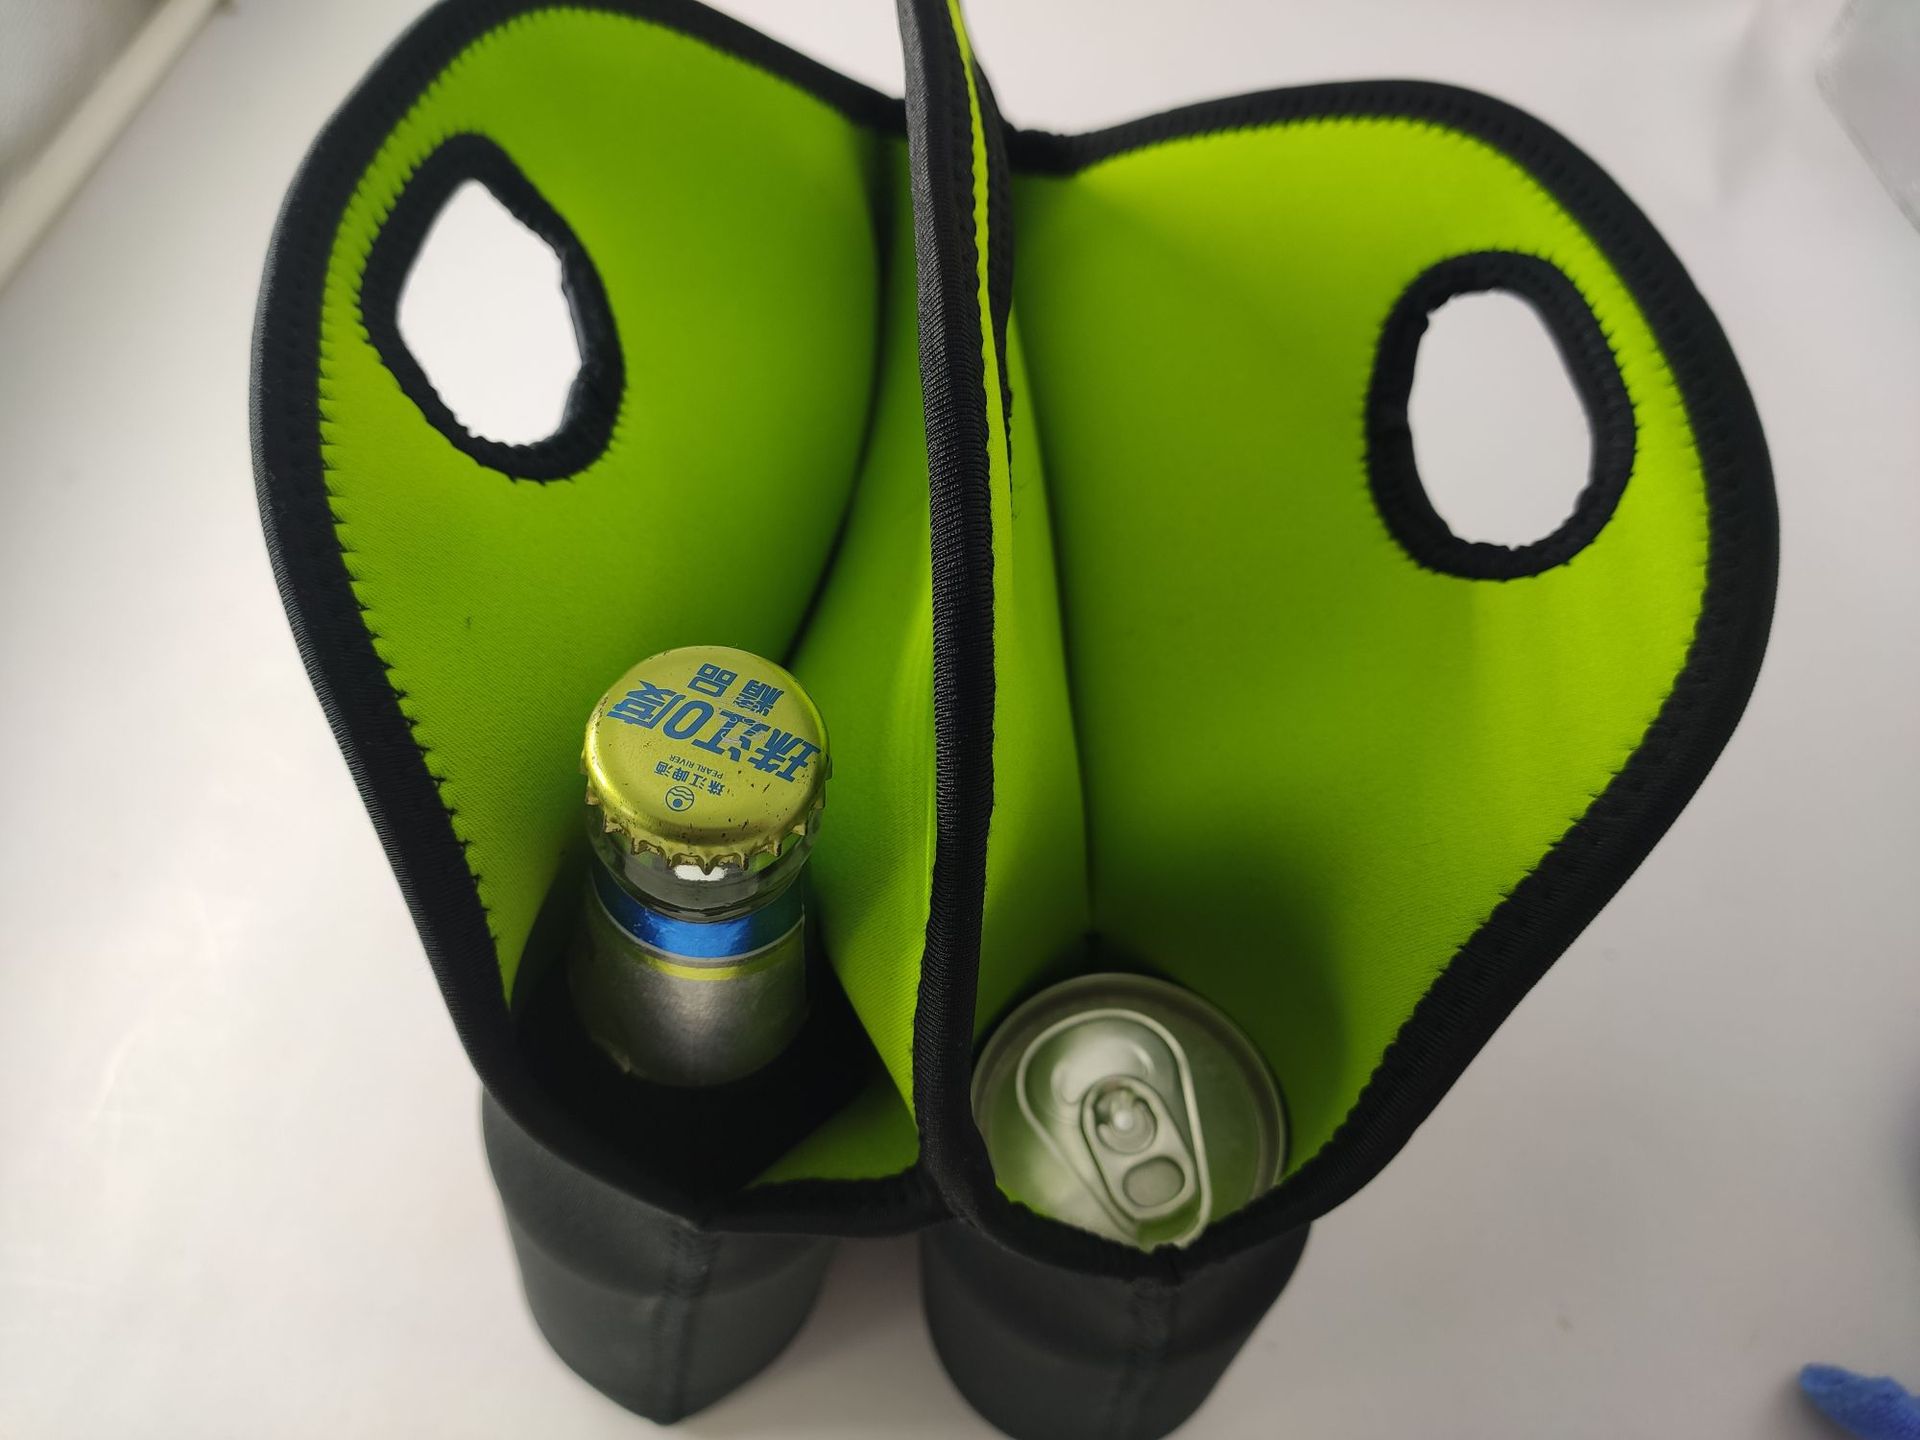 6 Bottles Insulated Neoprene Carrier Tote Carry Case Bag For Beer Baby  Bottle Cans Drinks